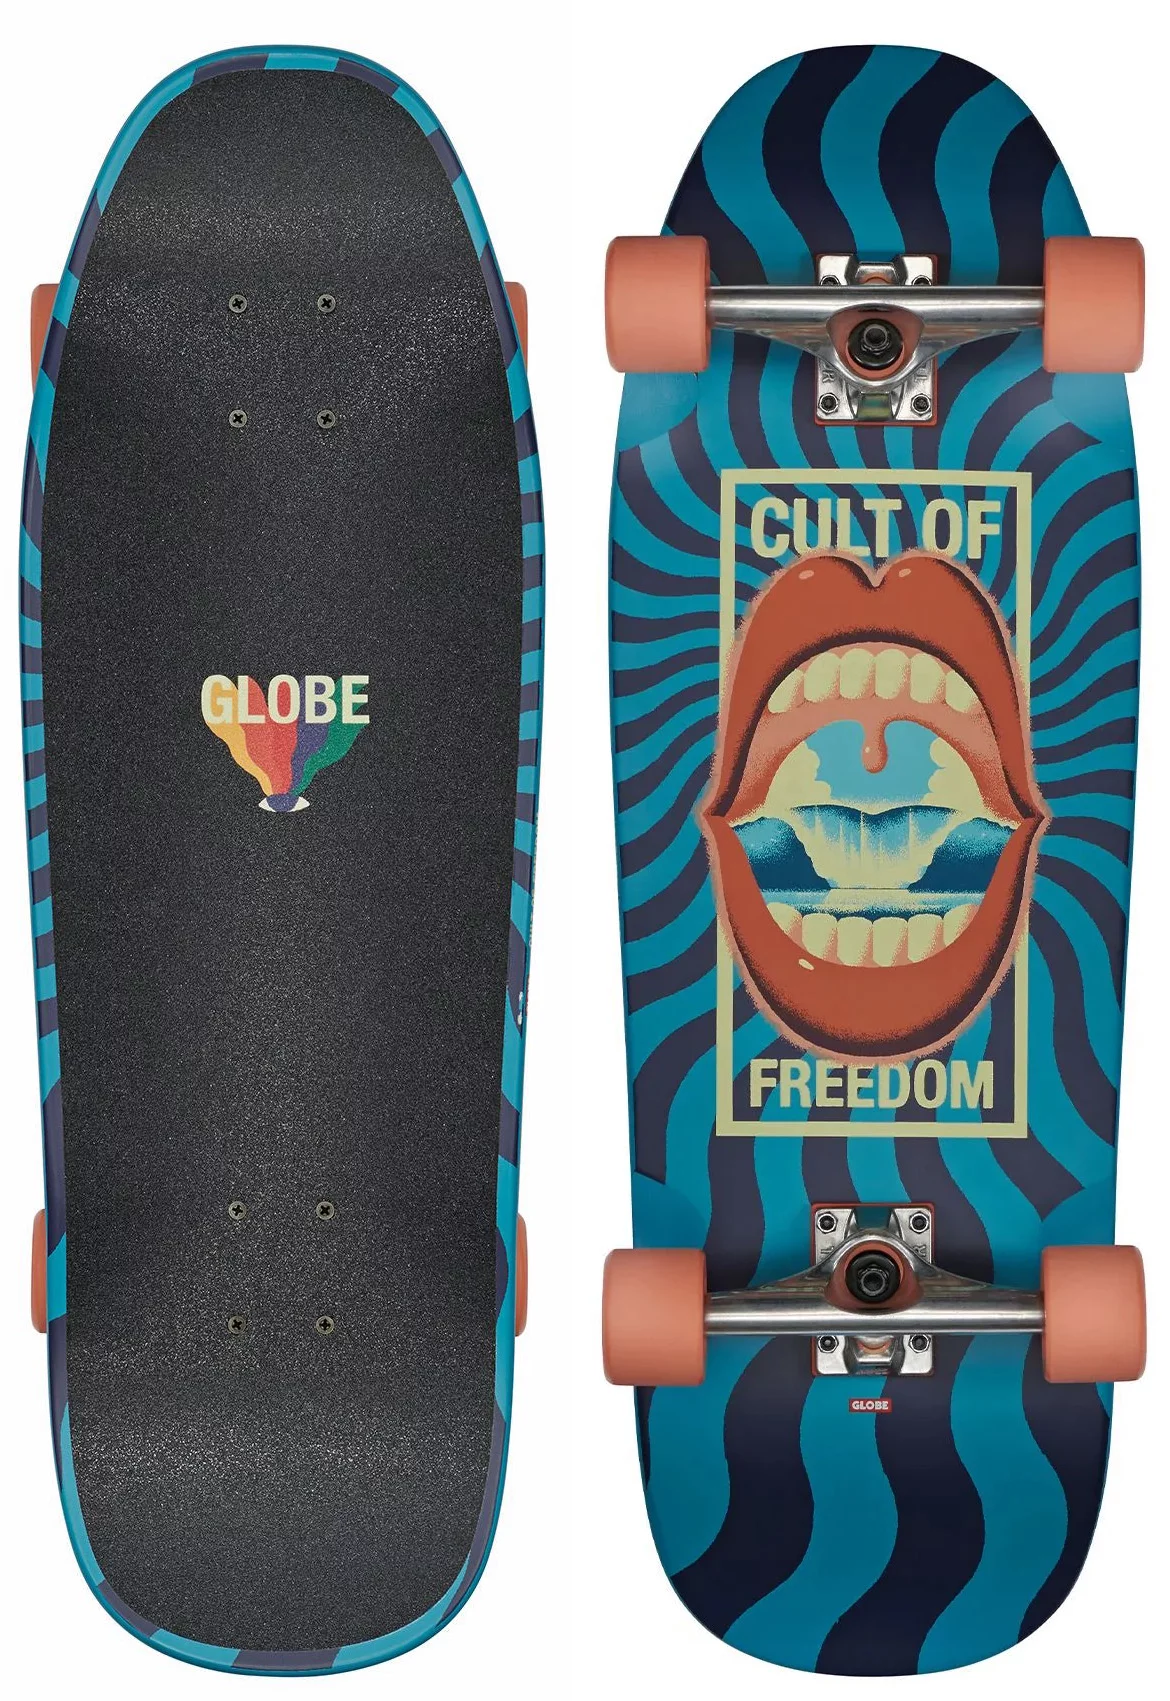 Globe Dealer 30" Complete Skateboard - cult of freedom/blue Free Shipping | Tactics